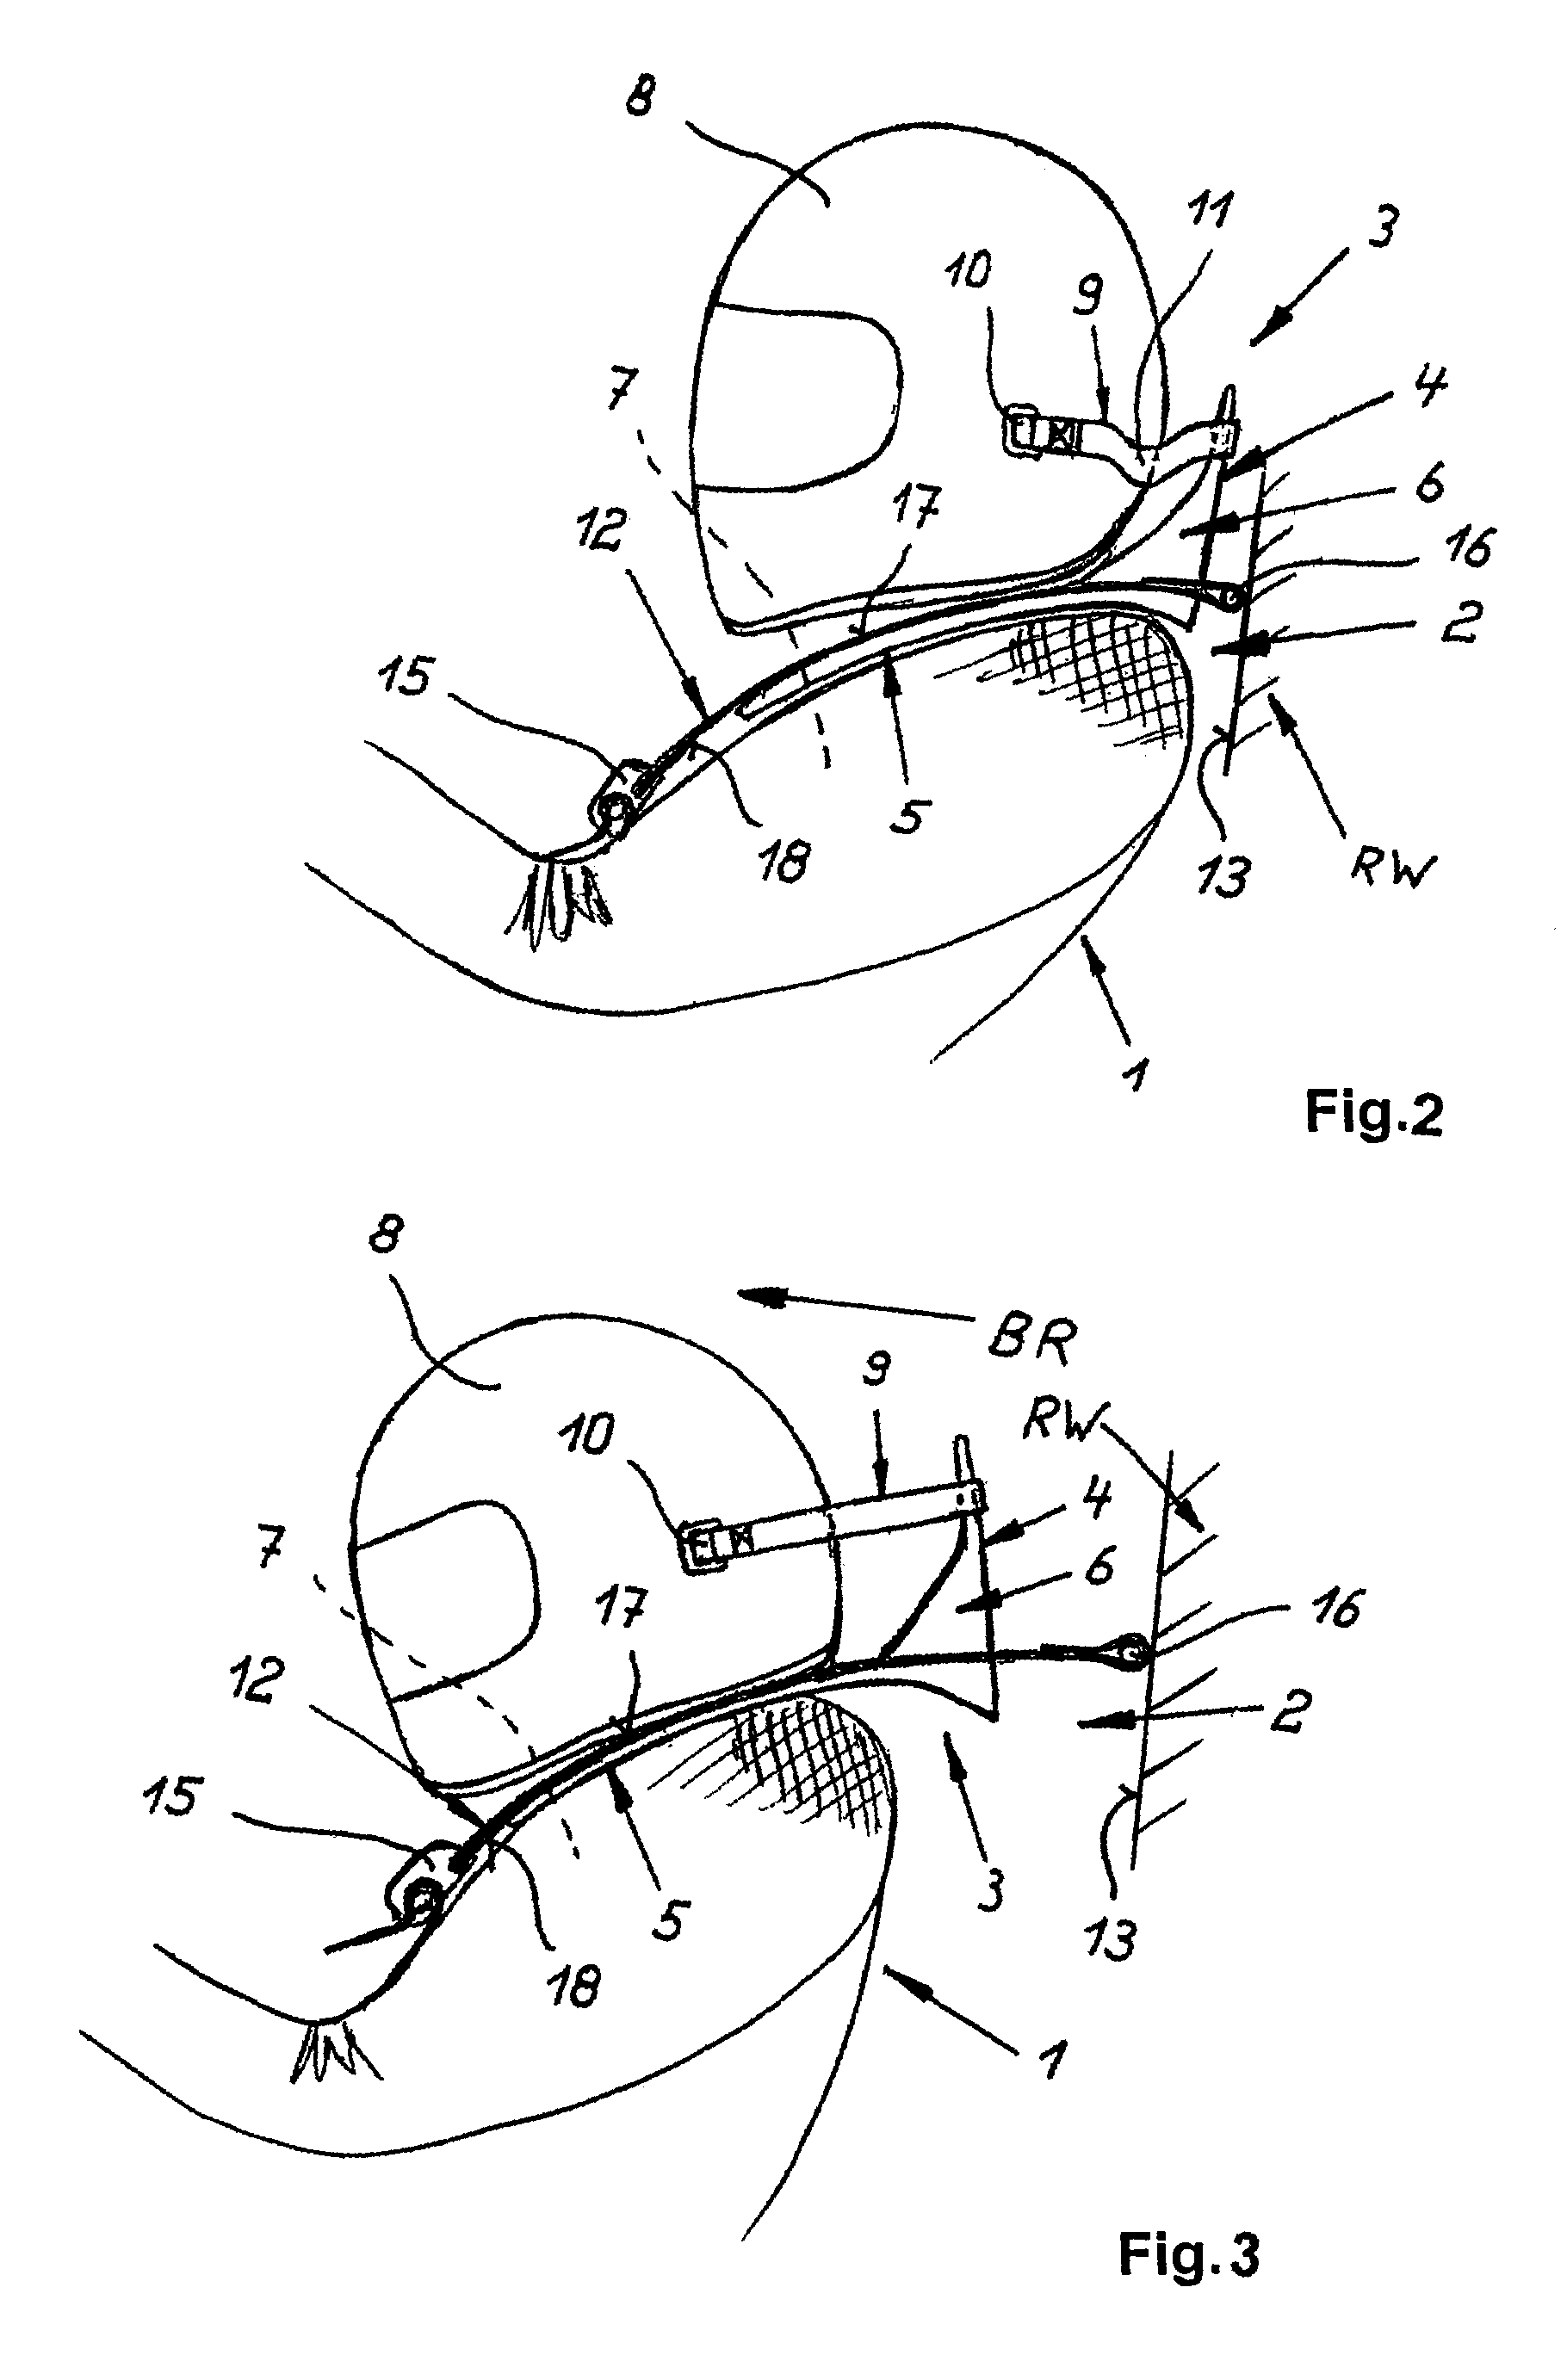 Restraint system for restraining a person in a vehicle of transportation